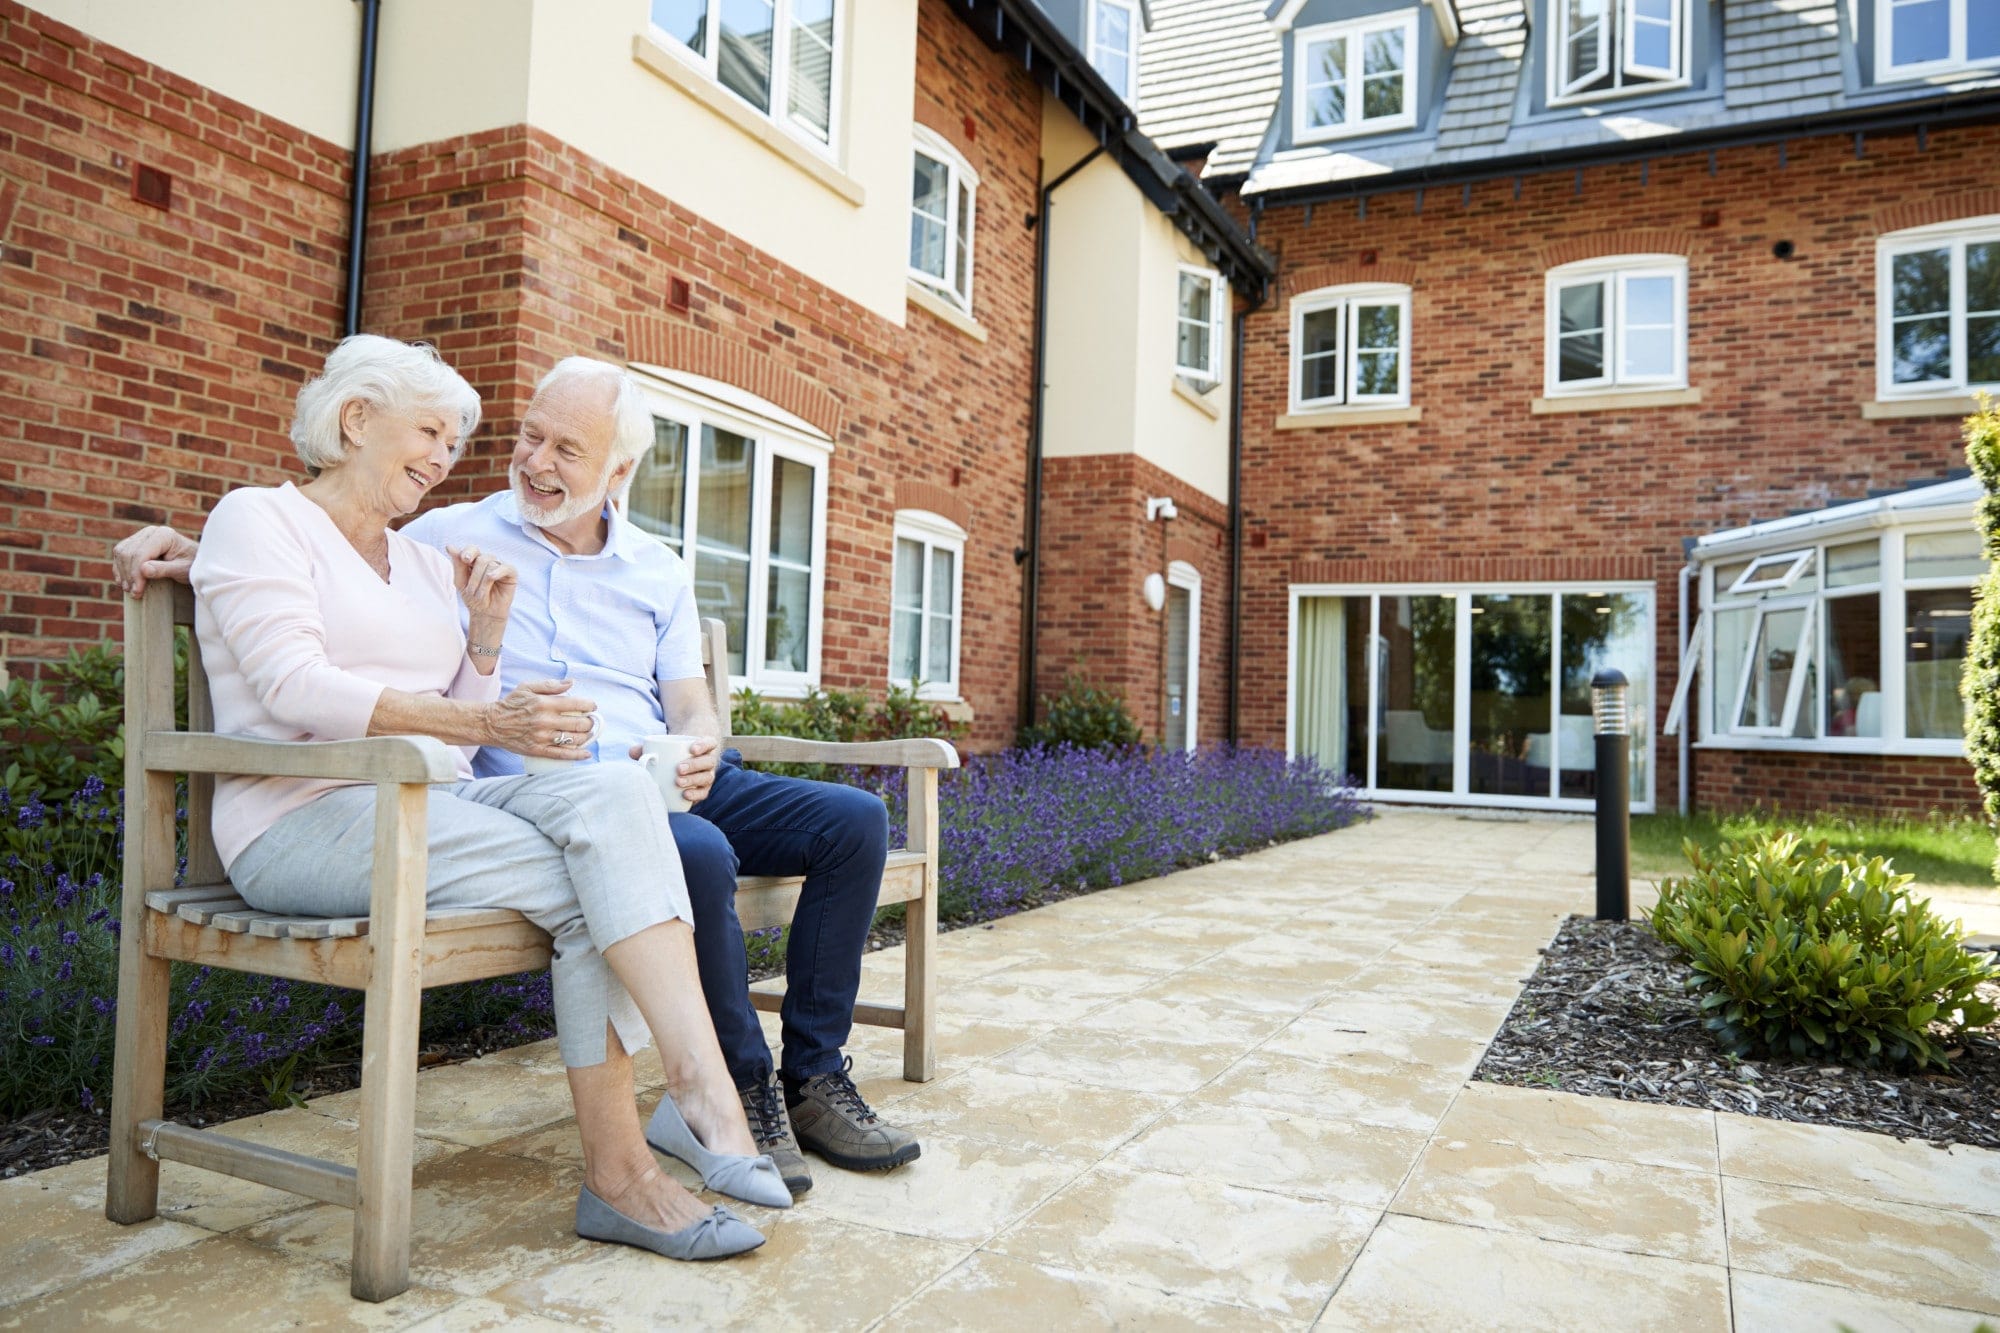 The Brief Guide That Makes Choosing a Senior Living Community Simple